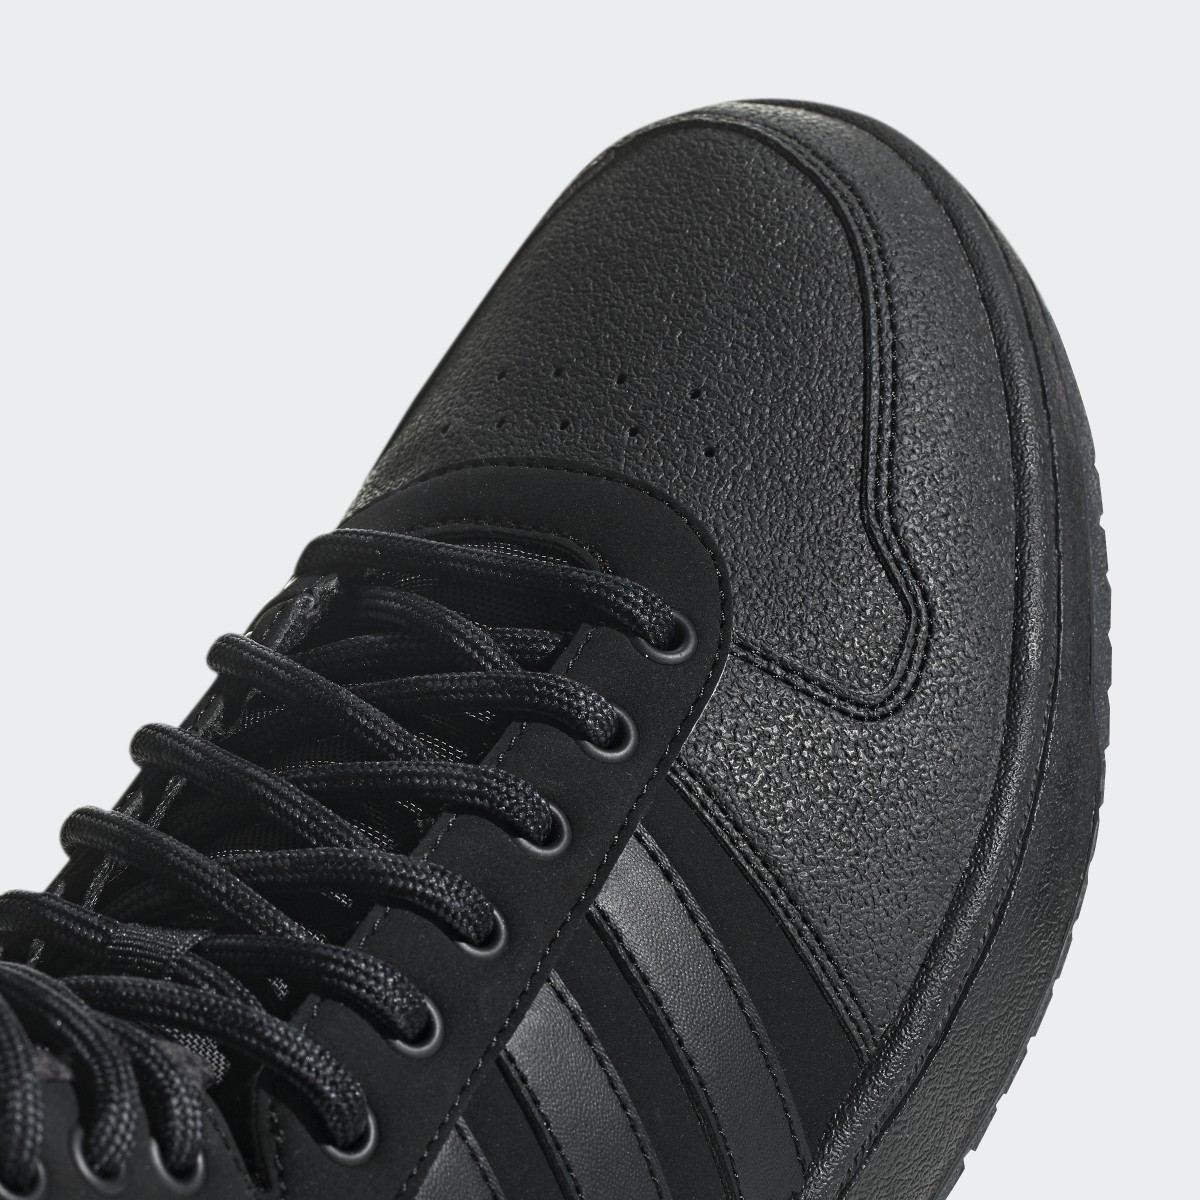 Adidas Hoops 2.0 Mid Shoes. 11